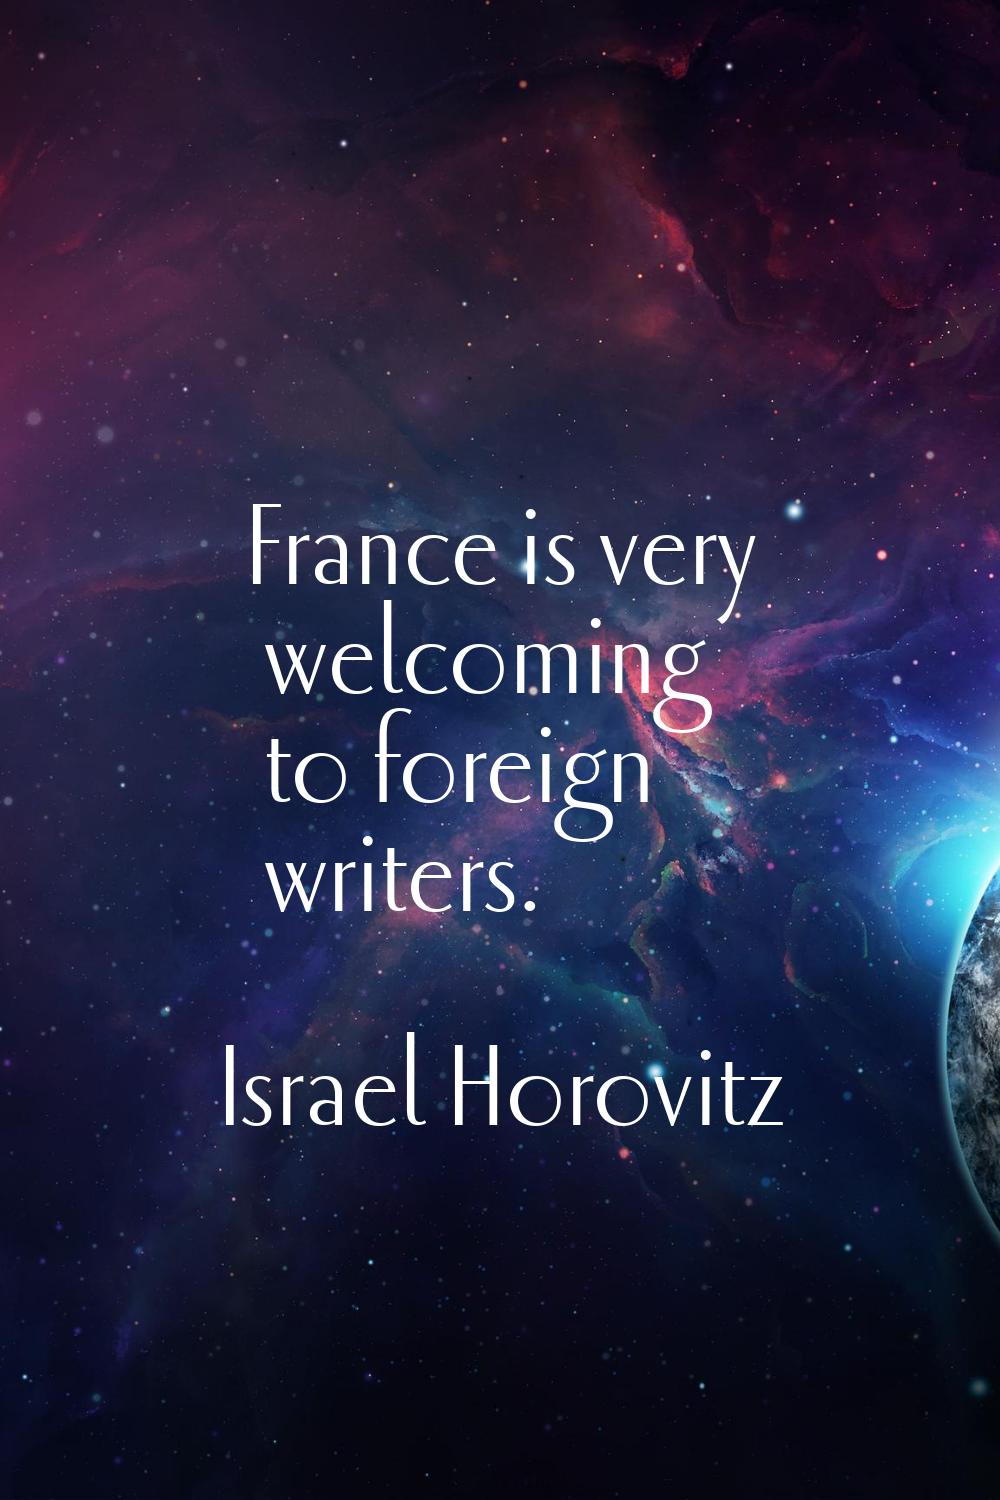 France is very welcoming to foreign writers.